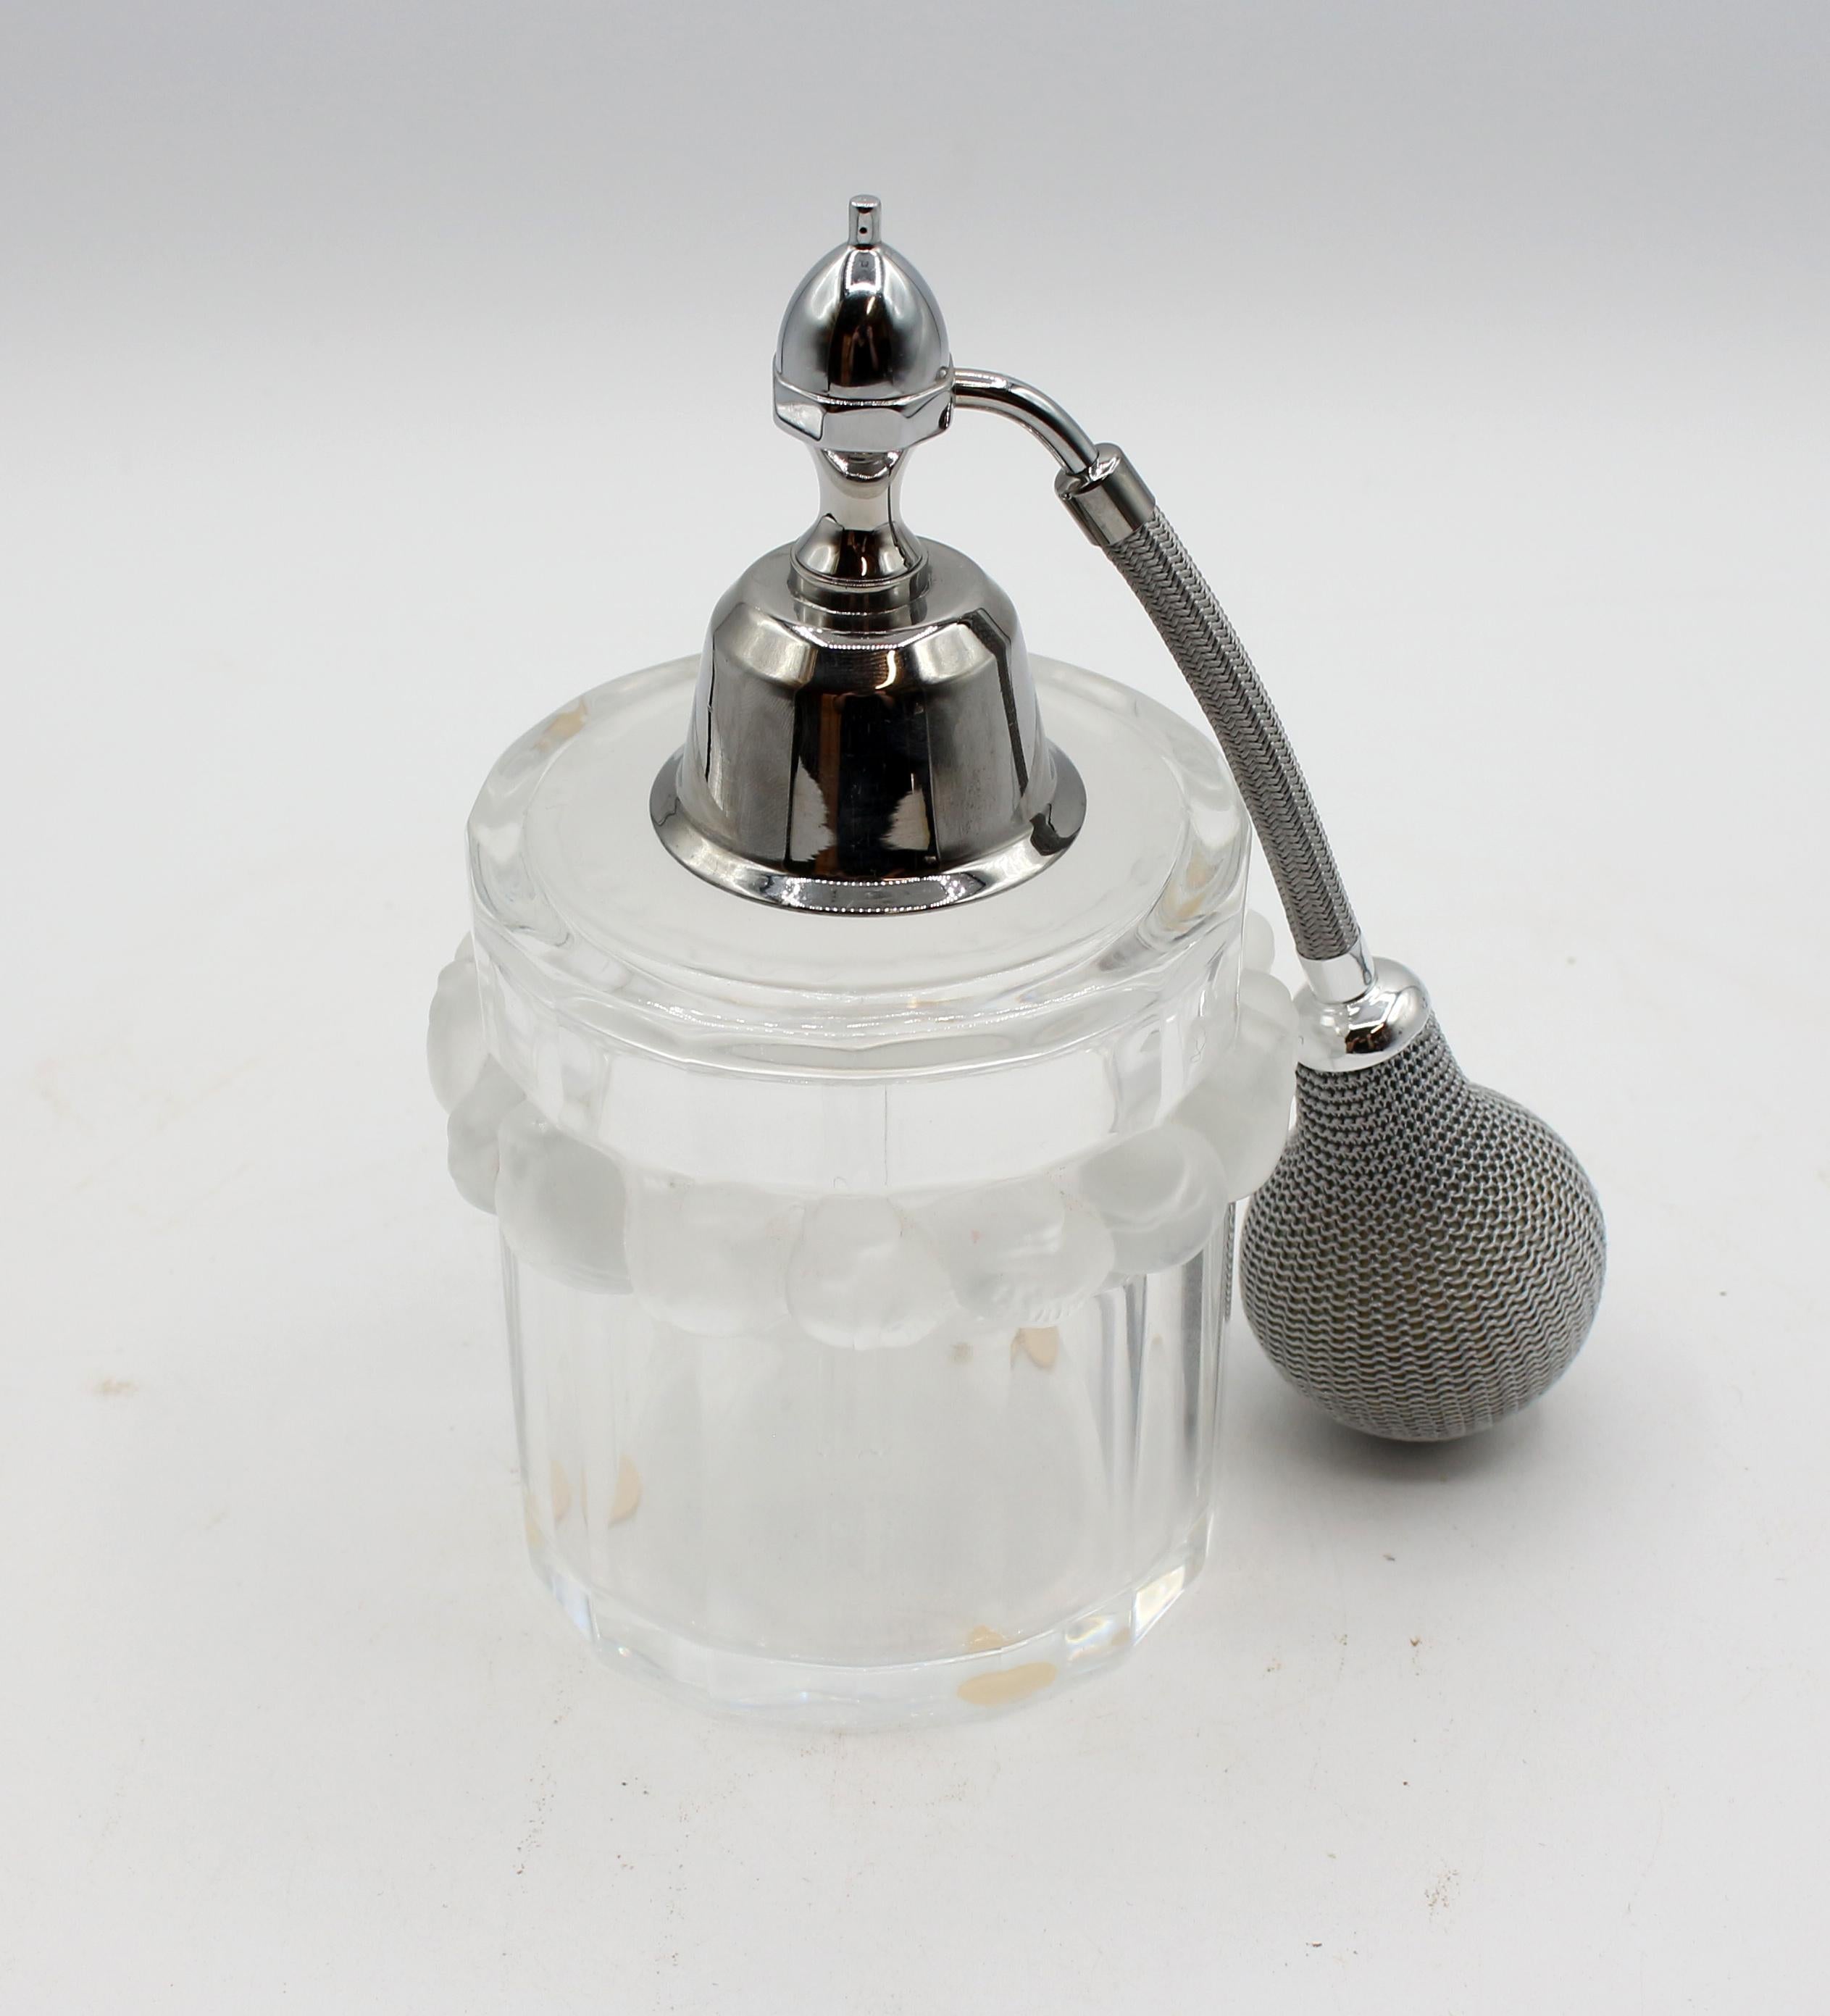 Mid-20th century Lalique perfume bottle with atomizer, the Robinson model. A ring of frosted glass robins on a panelled body with pristine atomizer. Etched 